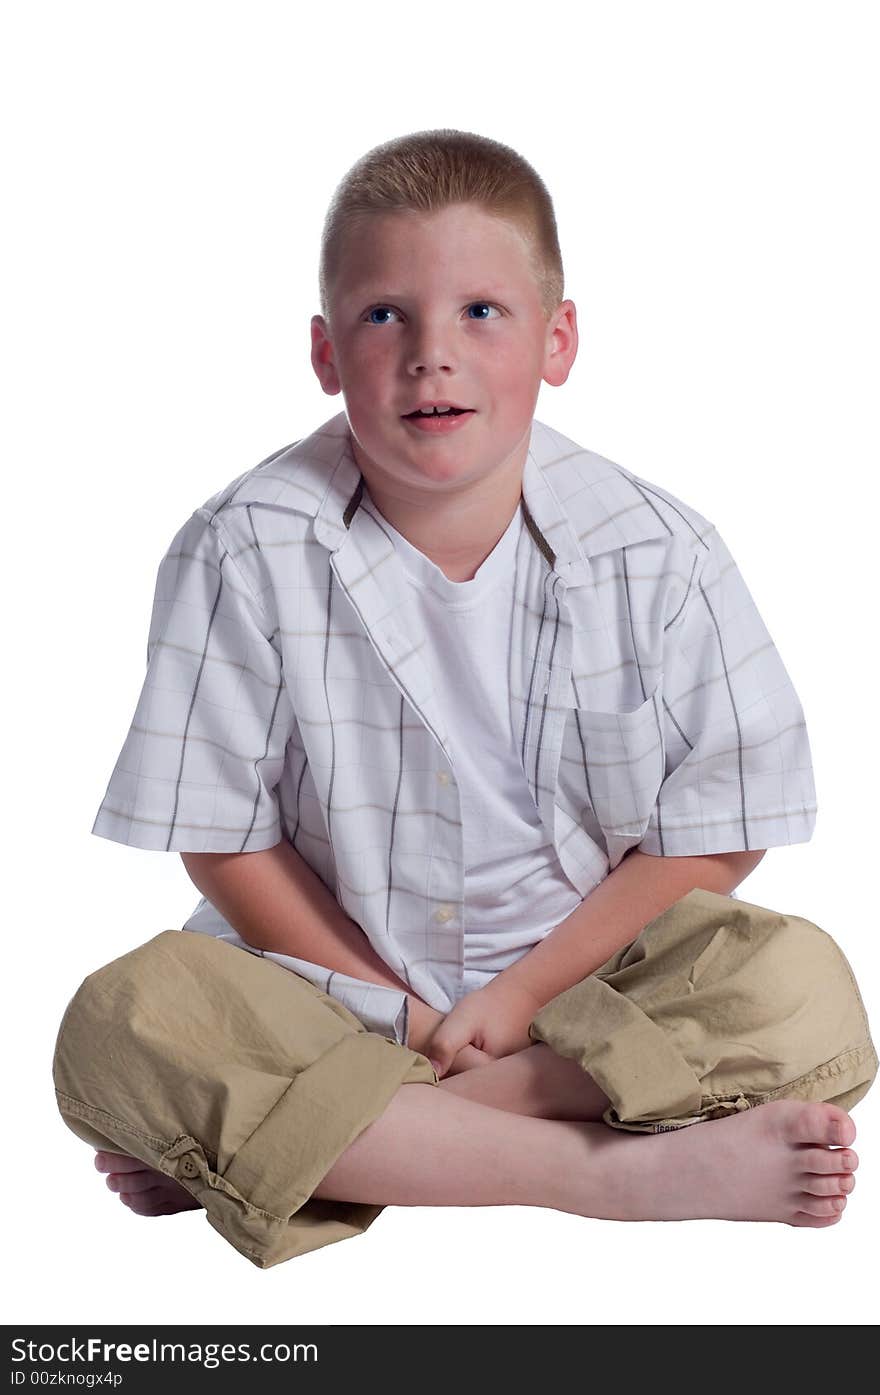 Little boy sitting cross legged on floor with eyes tilted up thinking isolated on white background. Little boy sitting cross legged on floor with eyes tilted up thinking isolated on white background